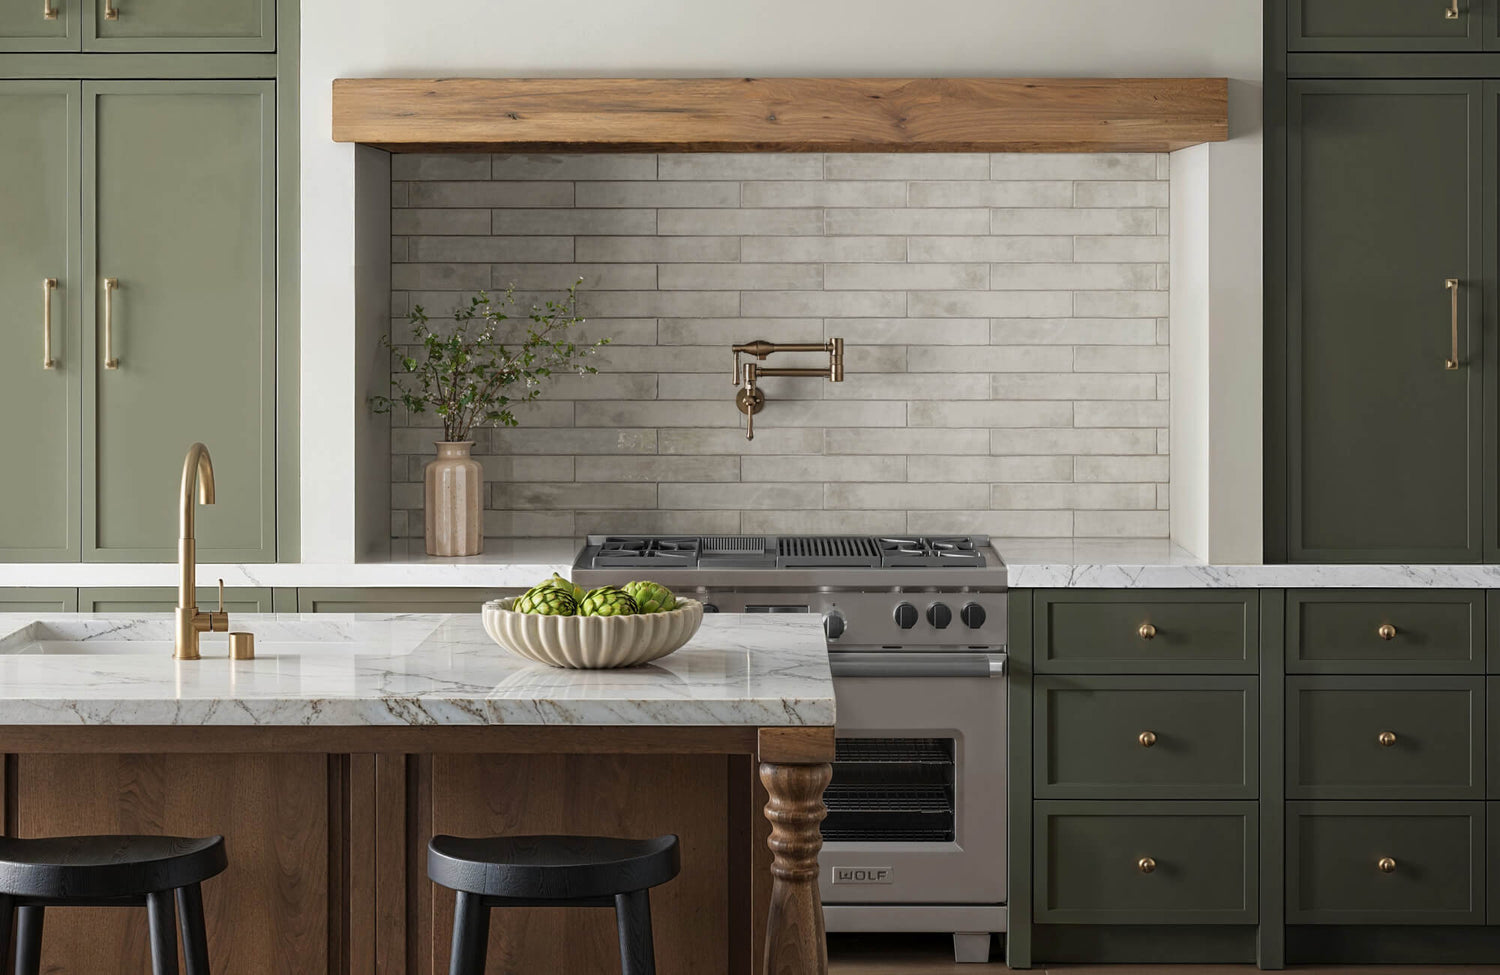 Rustic kitchen featuring gray subway tile backsplash, sage green cabinetry, and a marble island with black stools, accented by brass fixtures and a bowl of artichokes